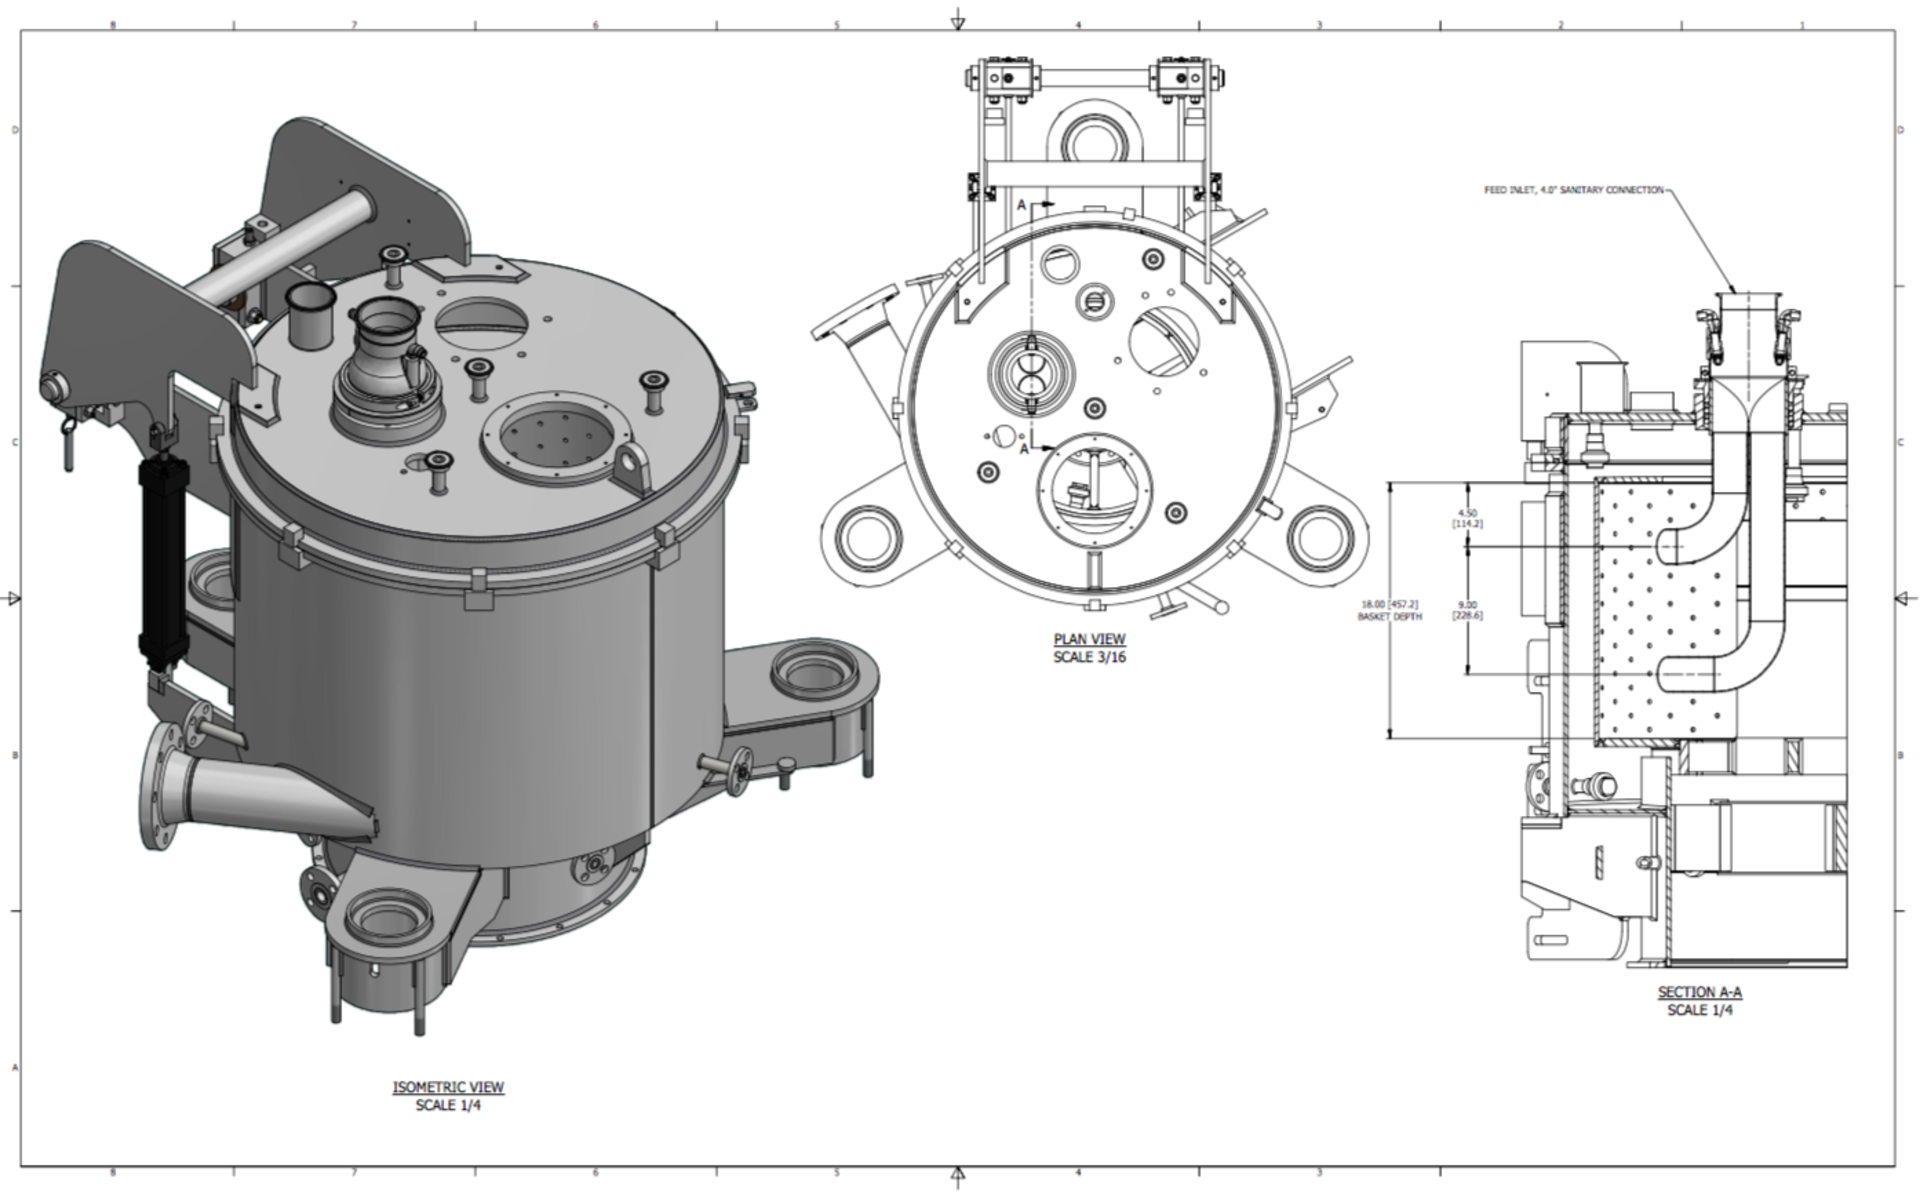 NEW Western States Machine Co. Centrifuge w/ PLC and Gate Valve, Model# Q-120, 30 HP, Year 2019, - Image 2 of 15